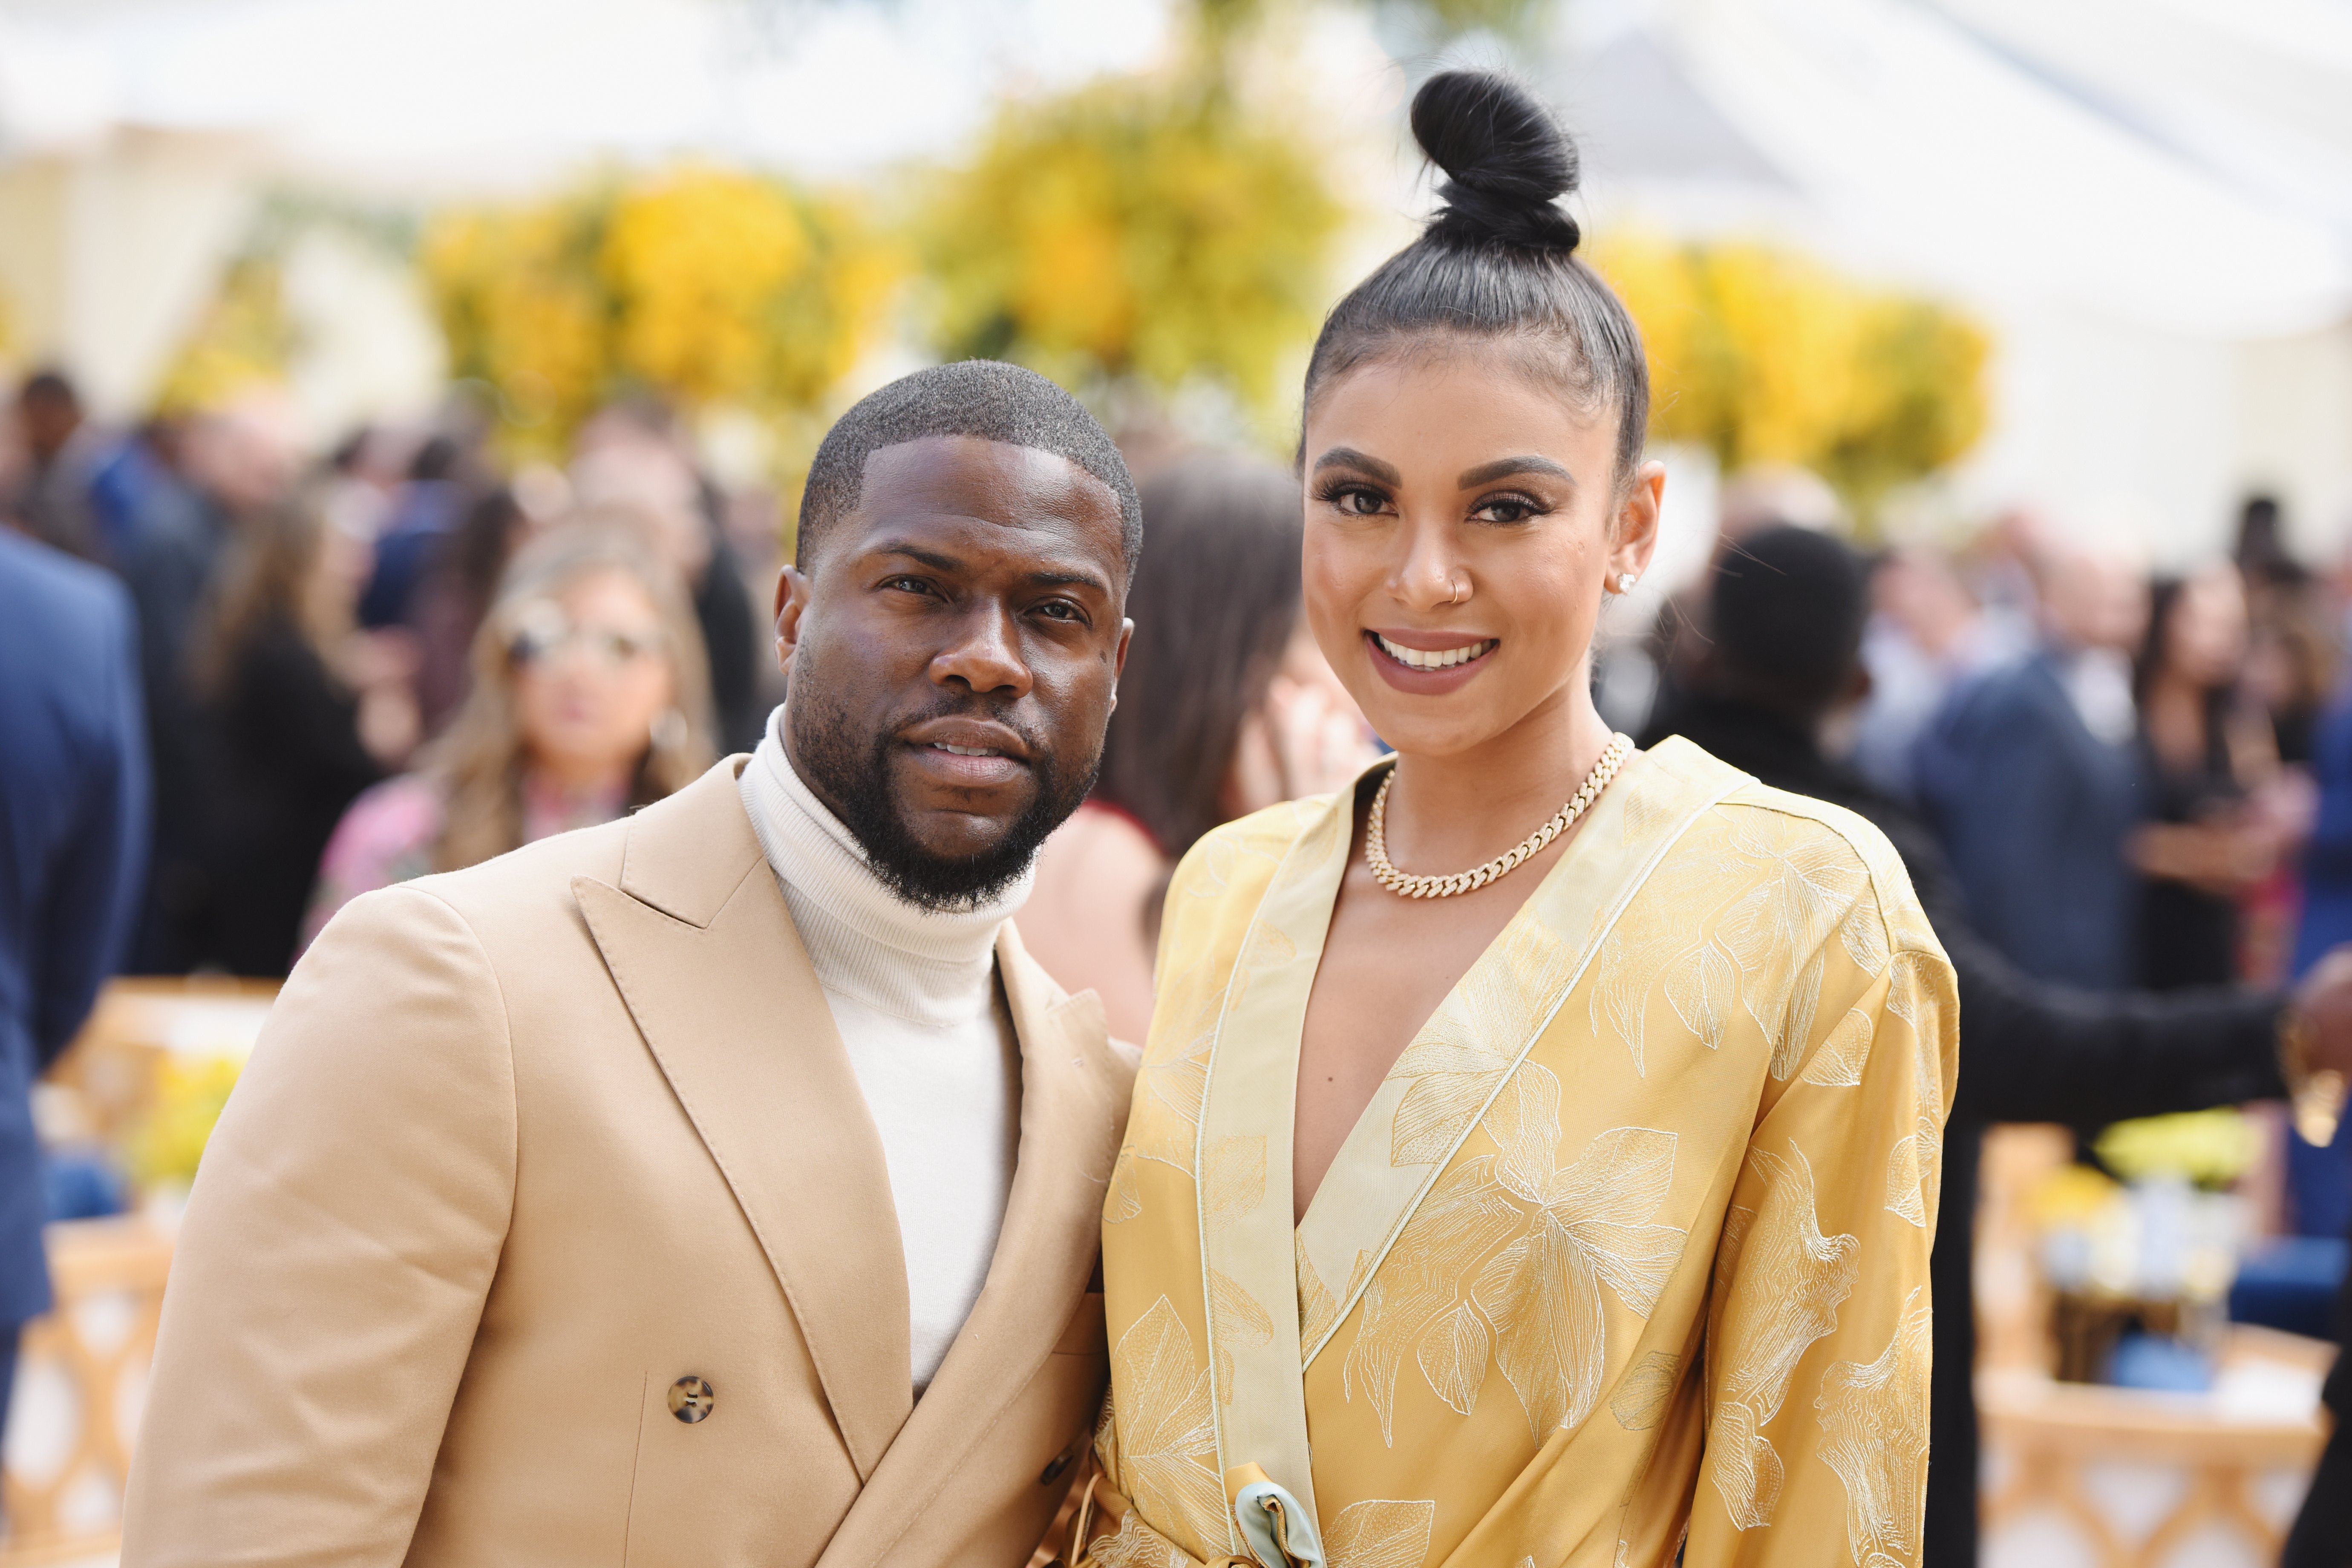 Kevin Hart and Eniko Parrish attend 2019 Roc Nation THE BRUNCH on February 9, 2019 in Los Angeles, California. | Photo by Vivien Killilea/Getty Images for Roc Nation 